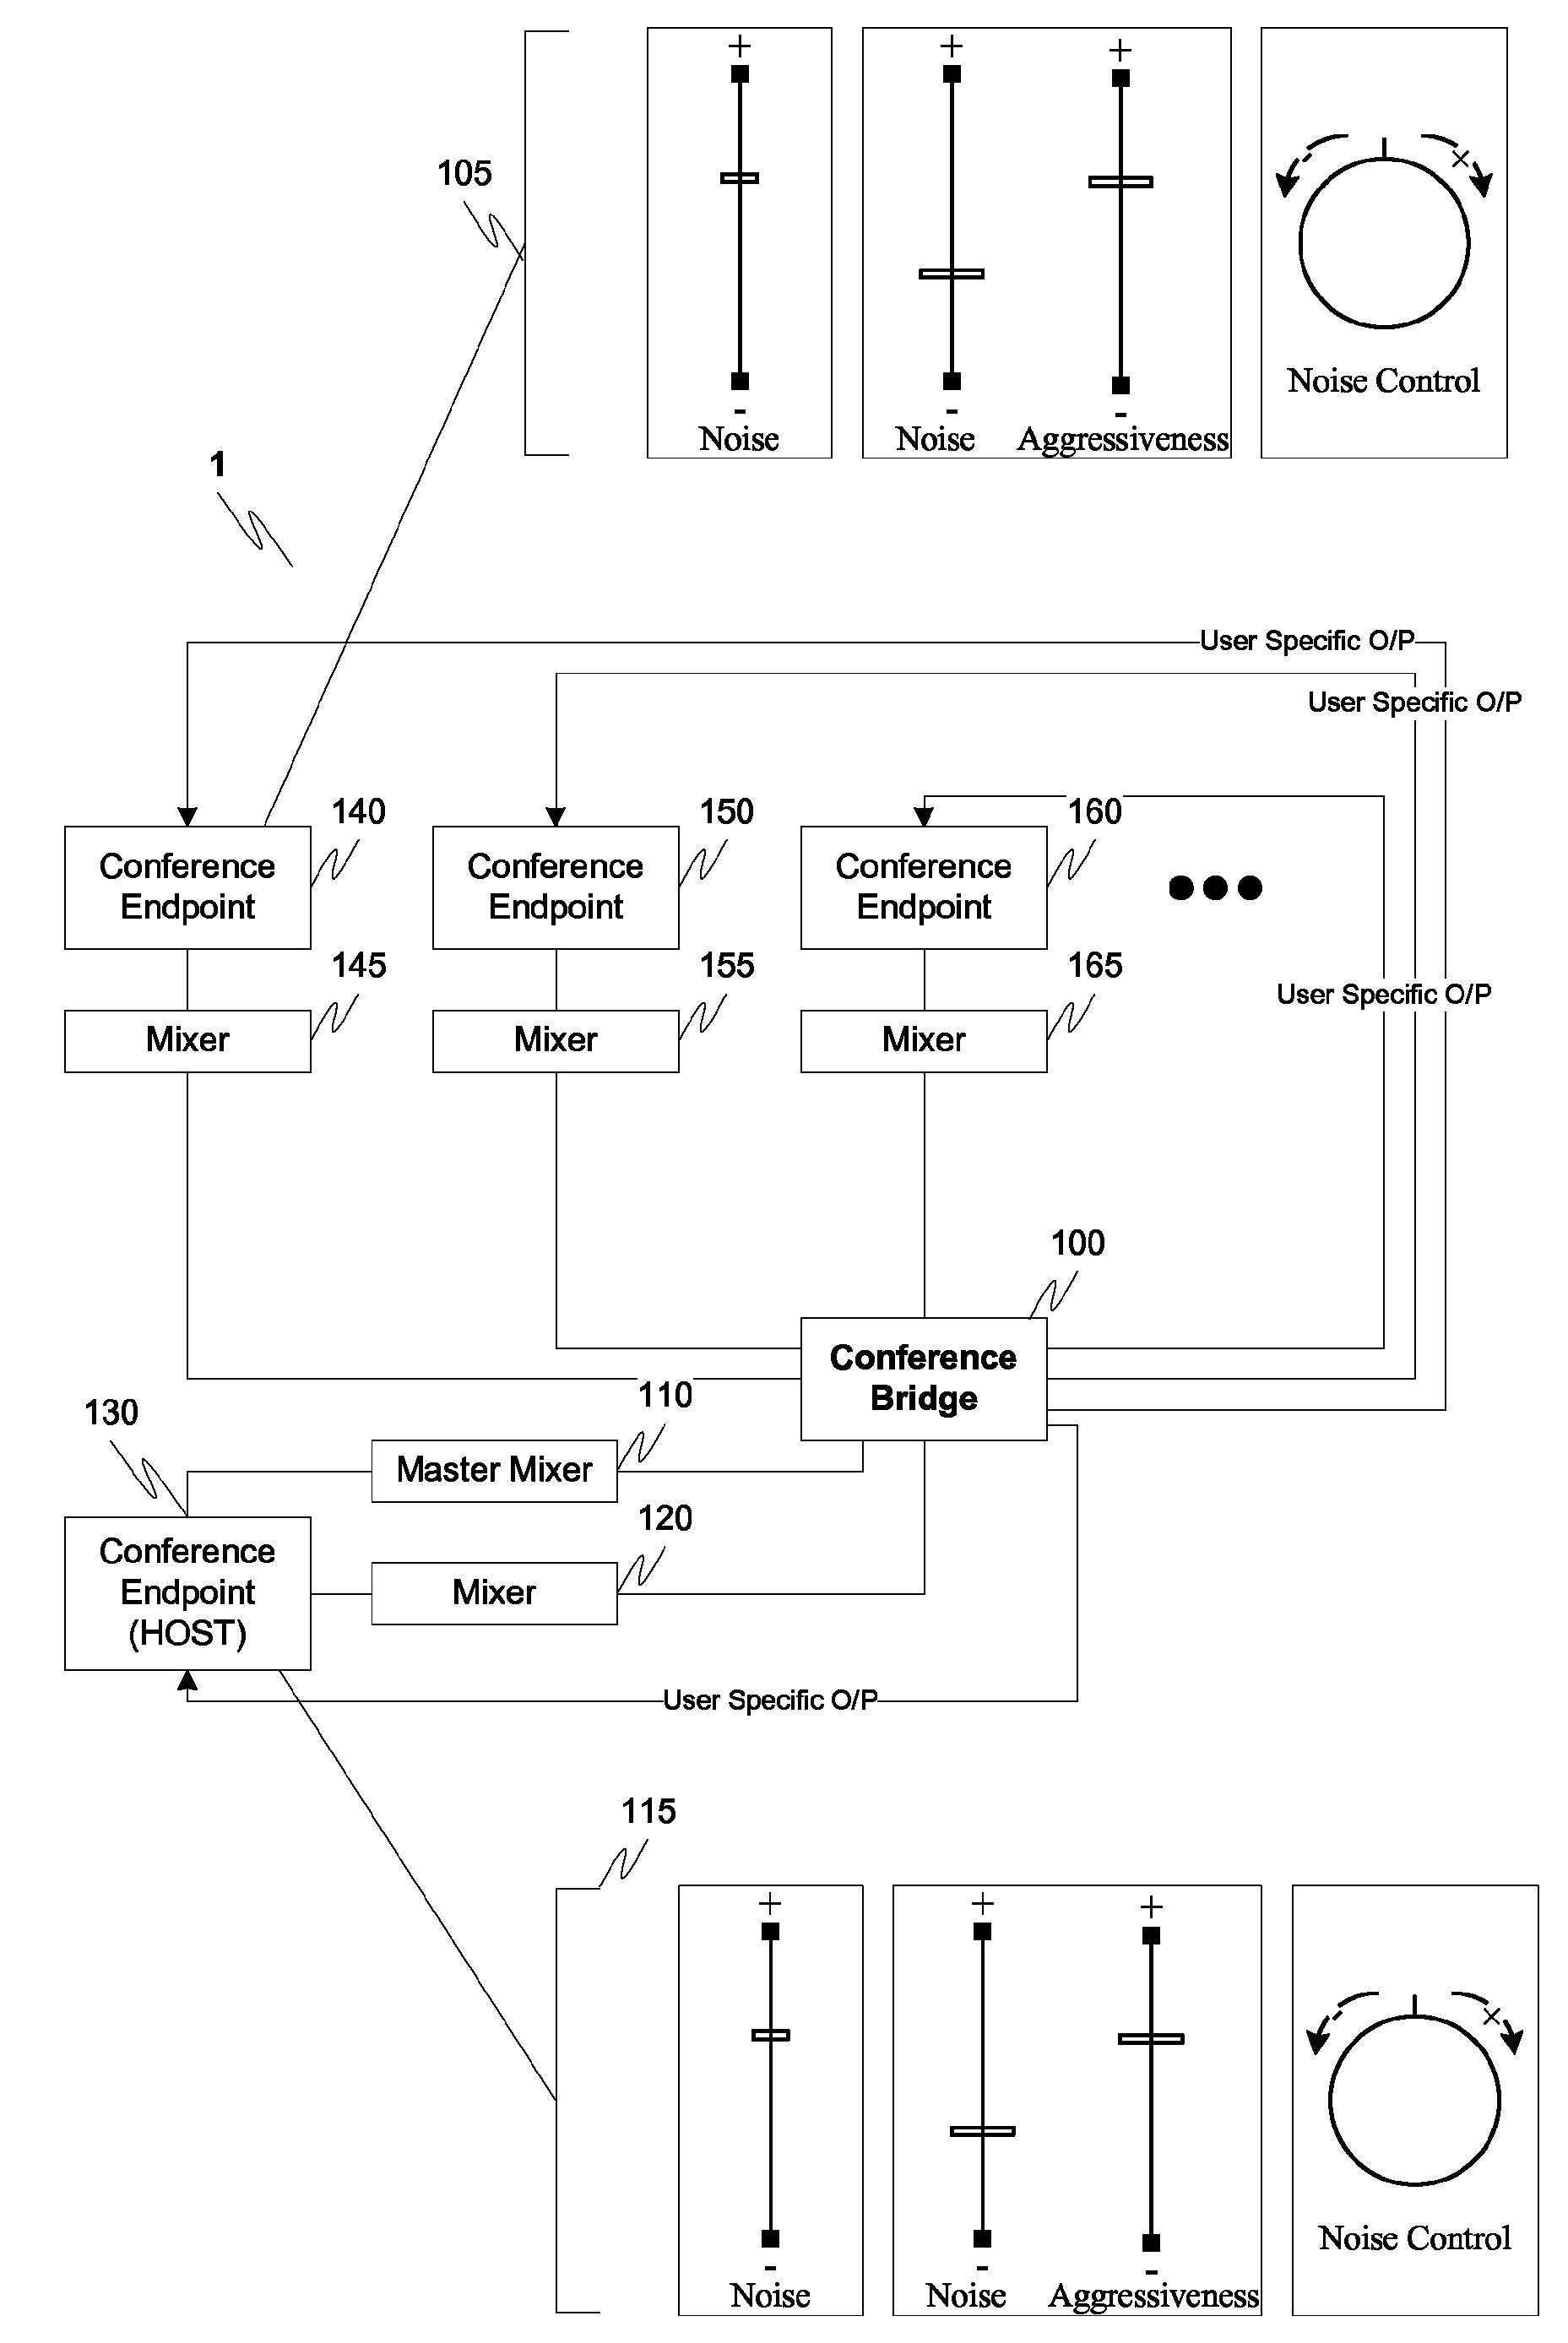 Variable noise control threshold